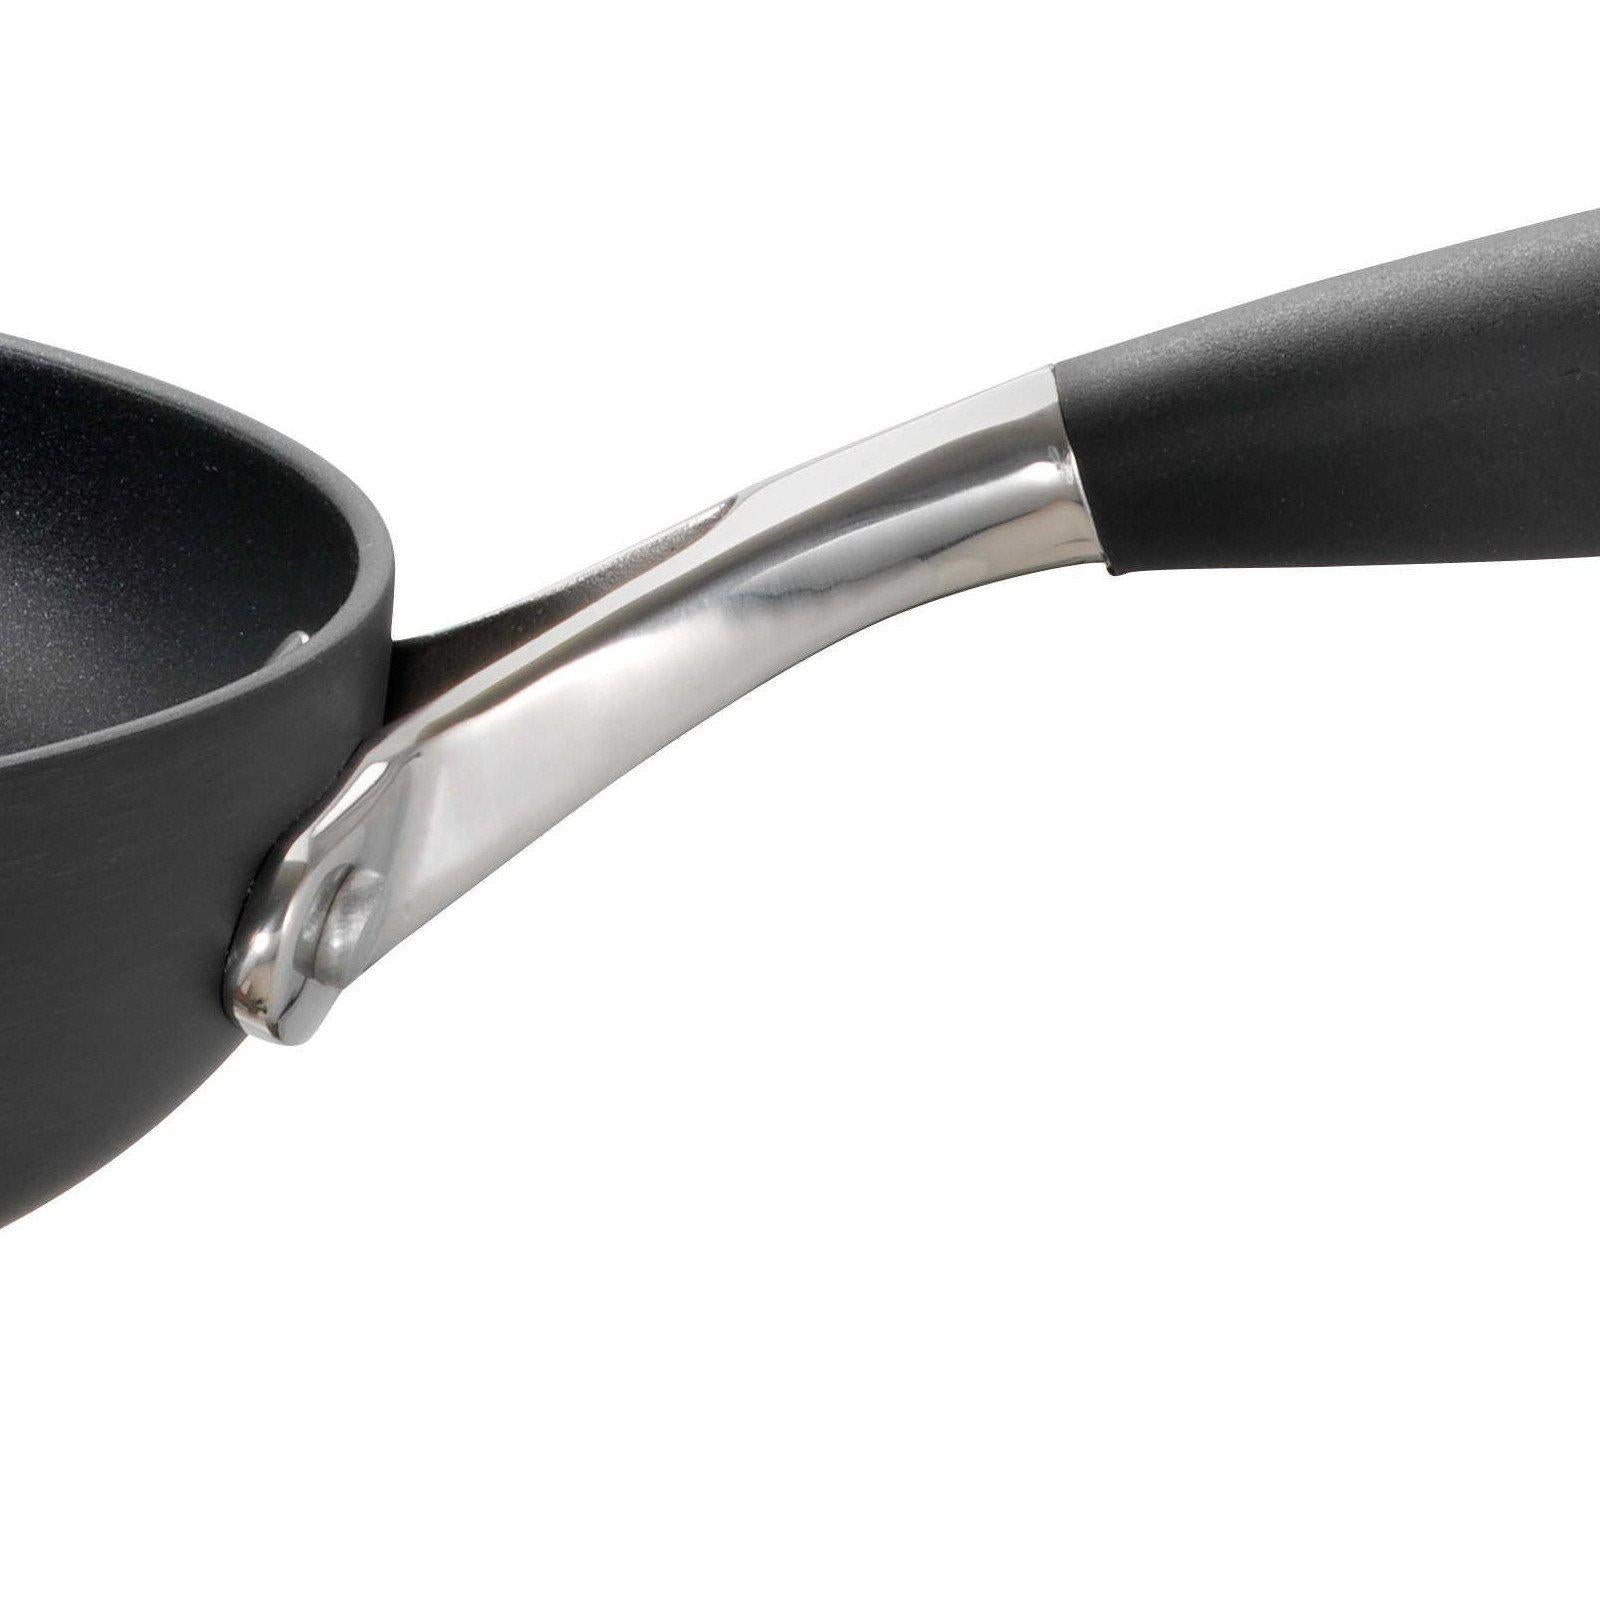 Blinq Elite 28CM Frypan - Nonstick Hard Anodised-Cookware Set-Chef's Quality Cookware